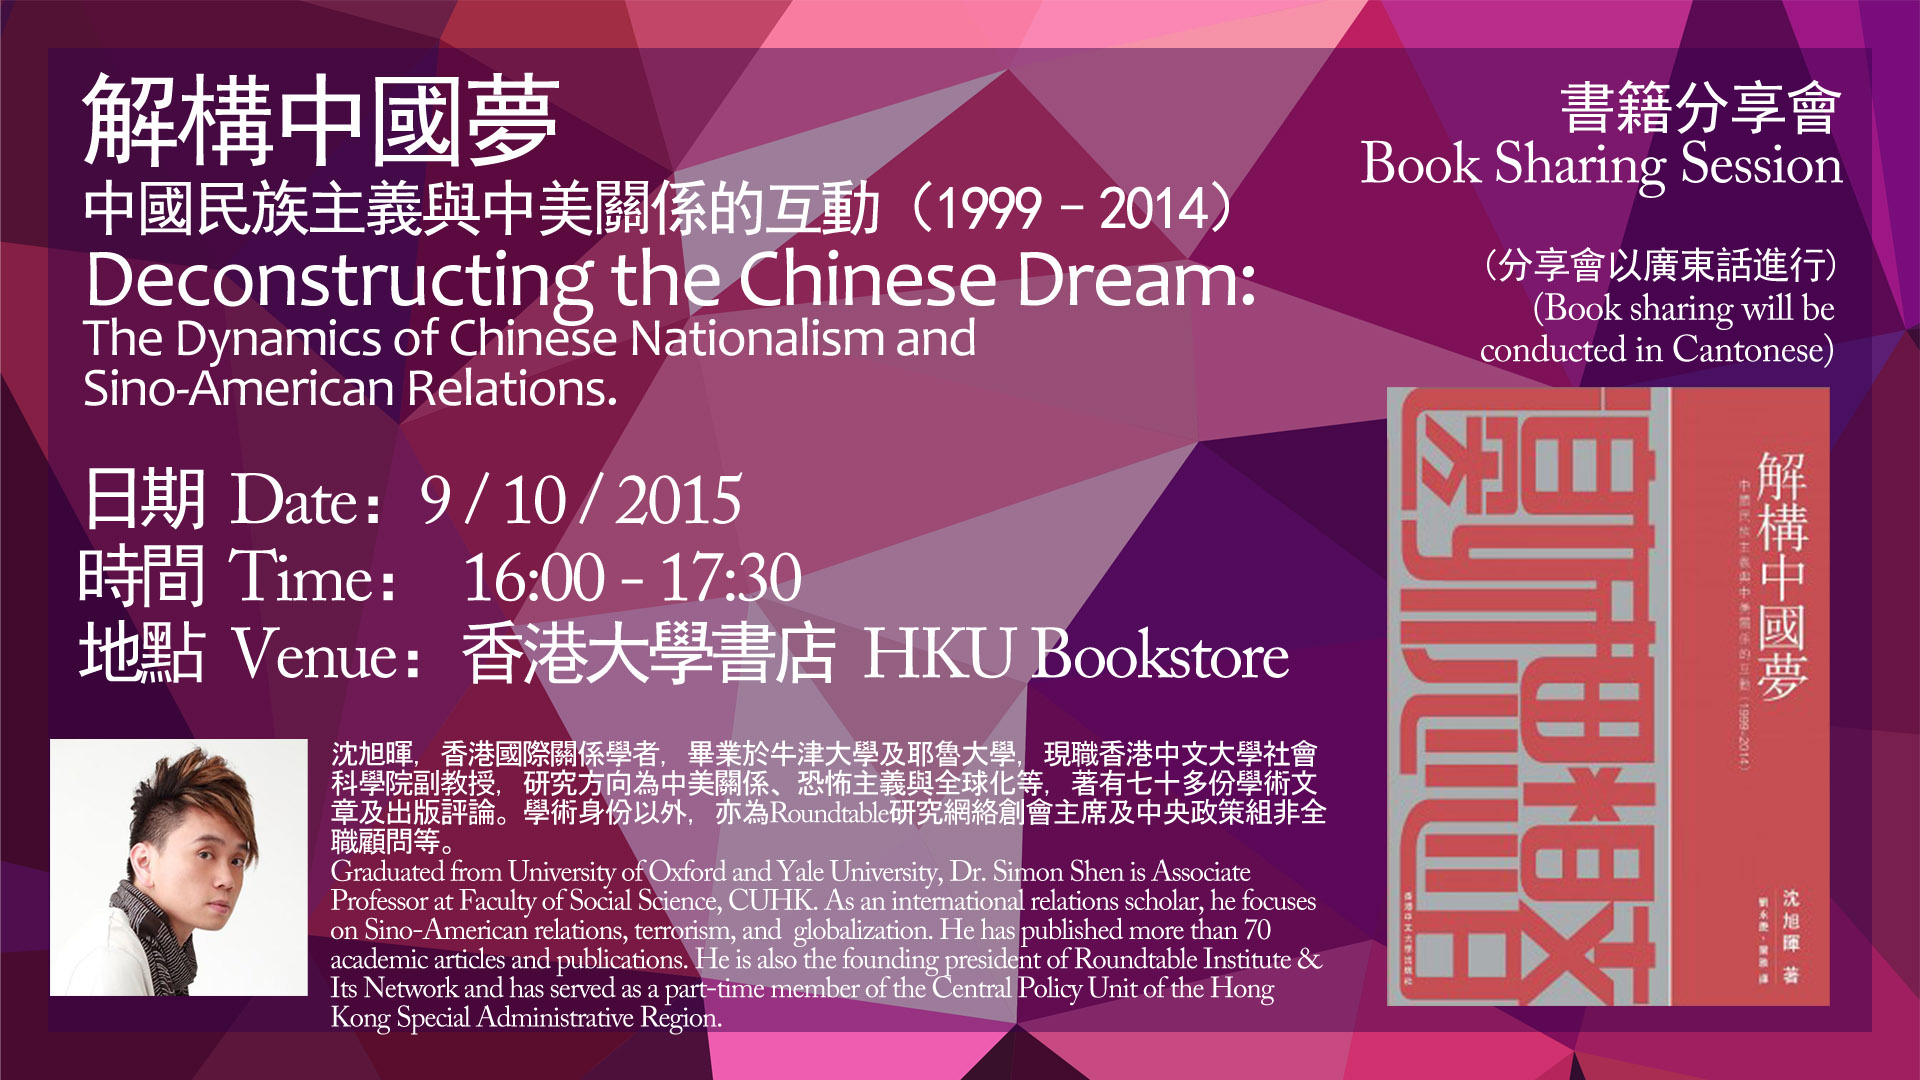 Deconstructing the Chinese Dream: The Dynamics of Chinese Nationalism and Sino-American Relations